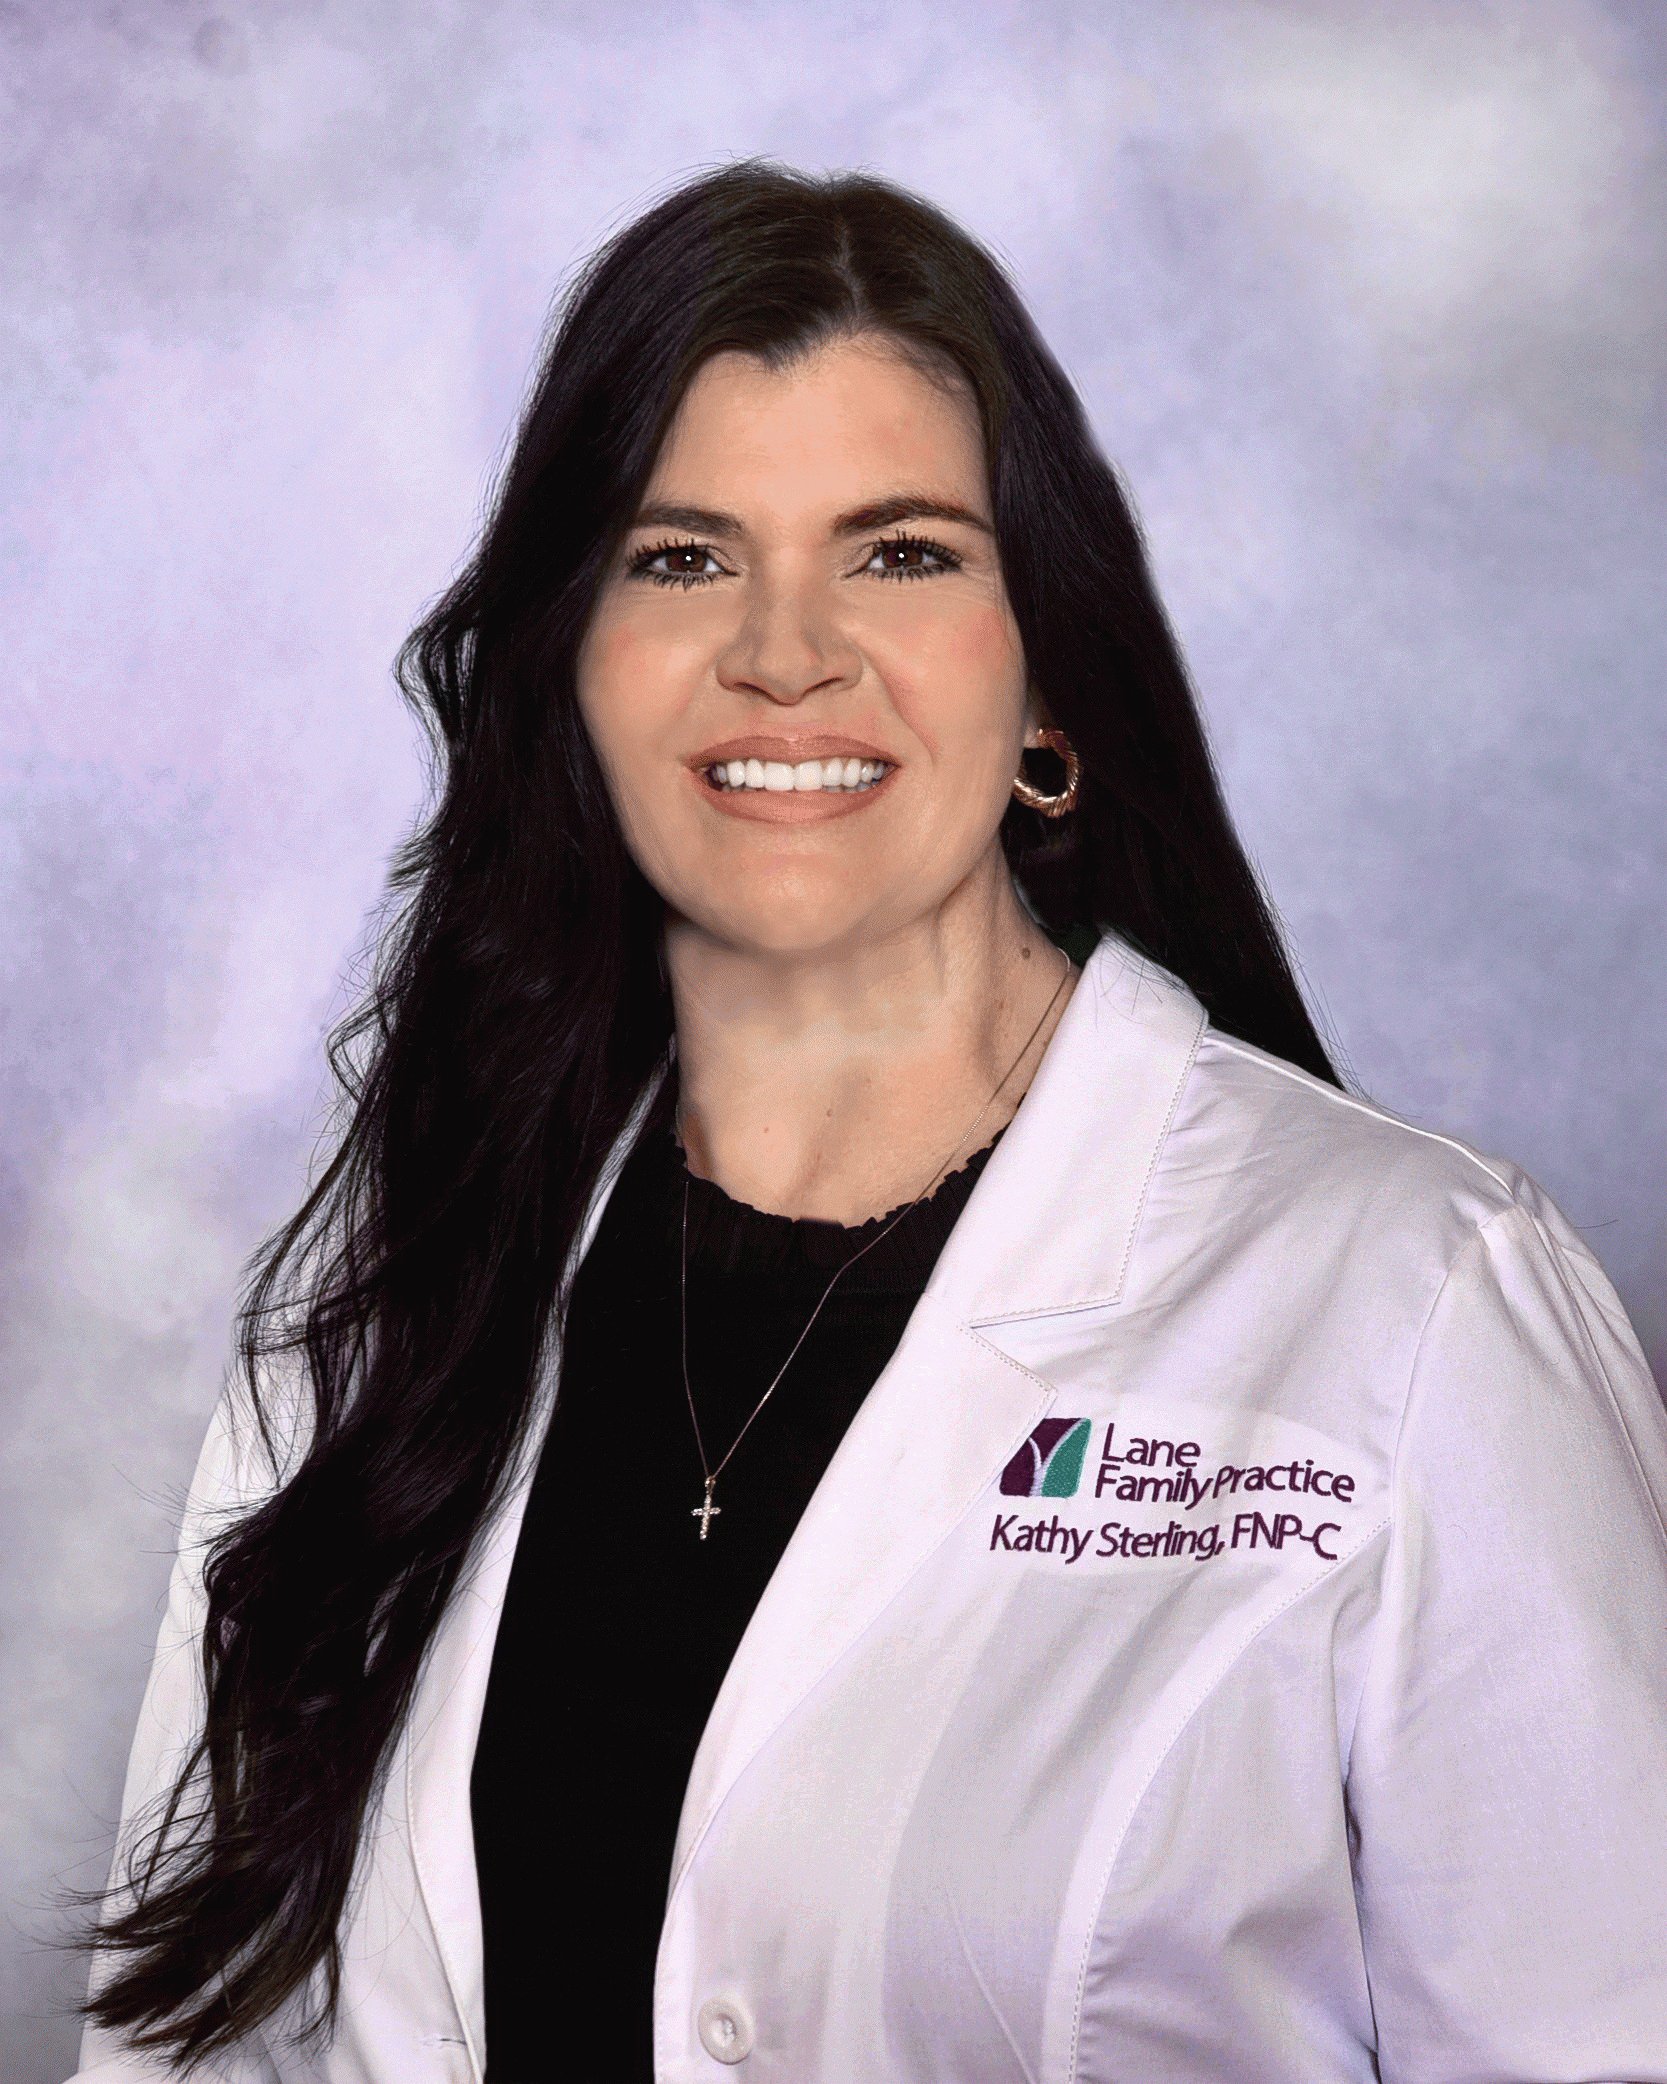 Certified Family Nurse Practitioner Kathy Sterling Joins Lane Family Practice